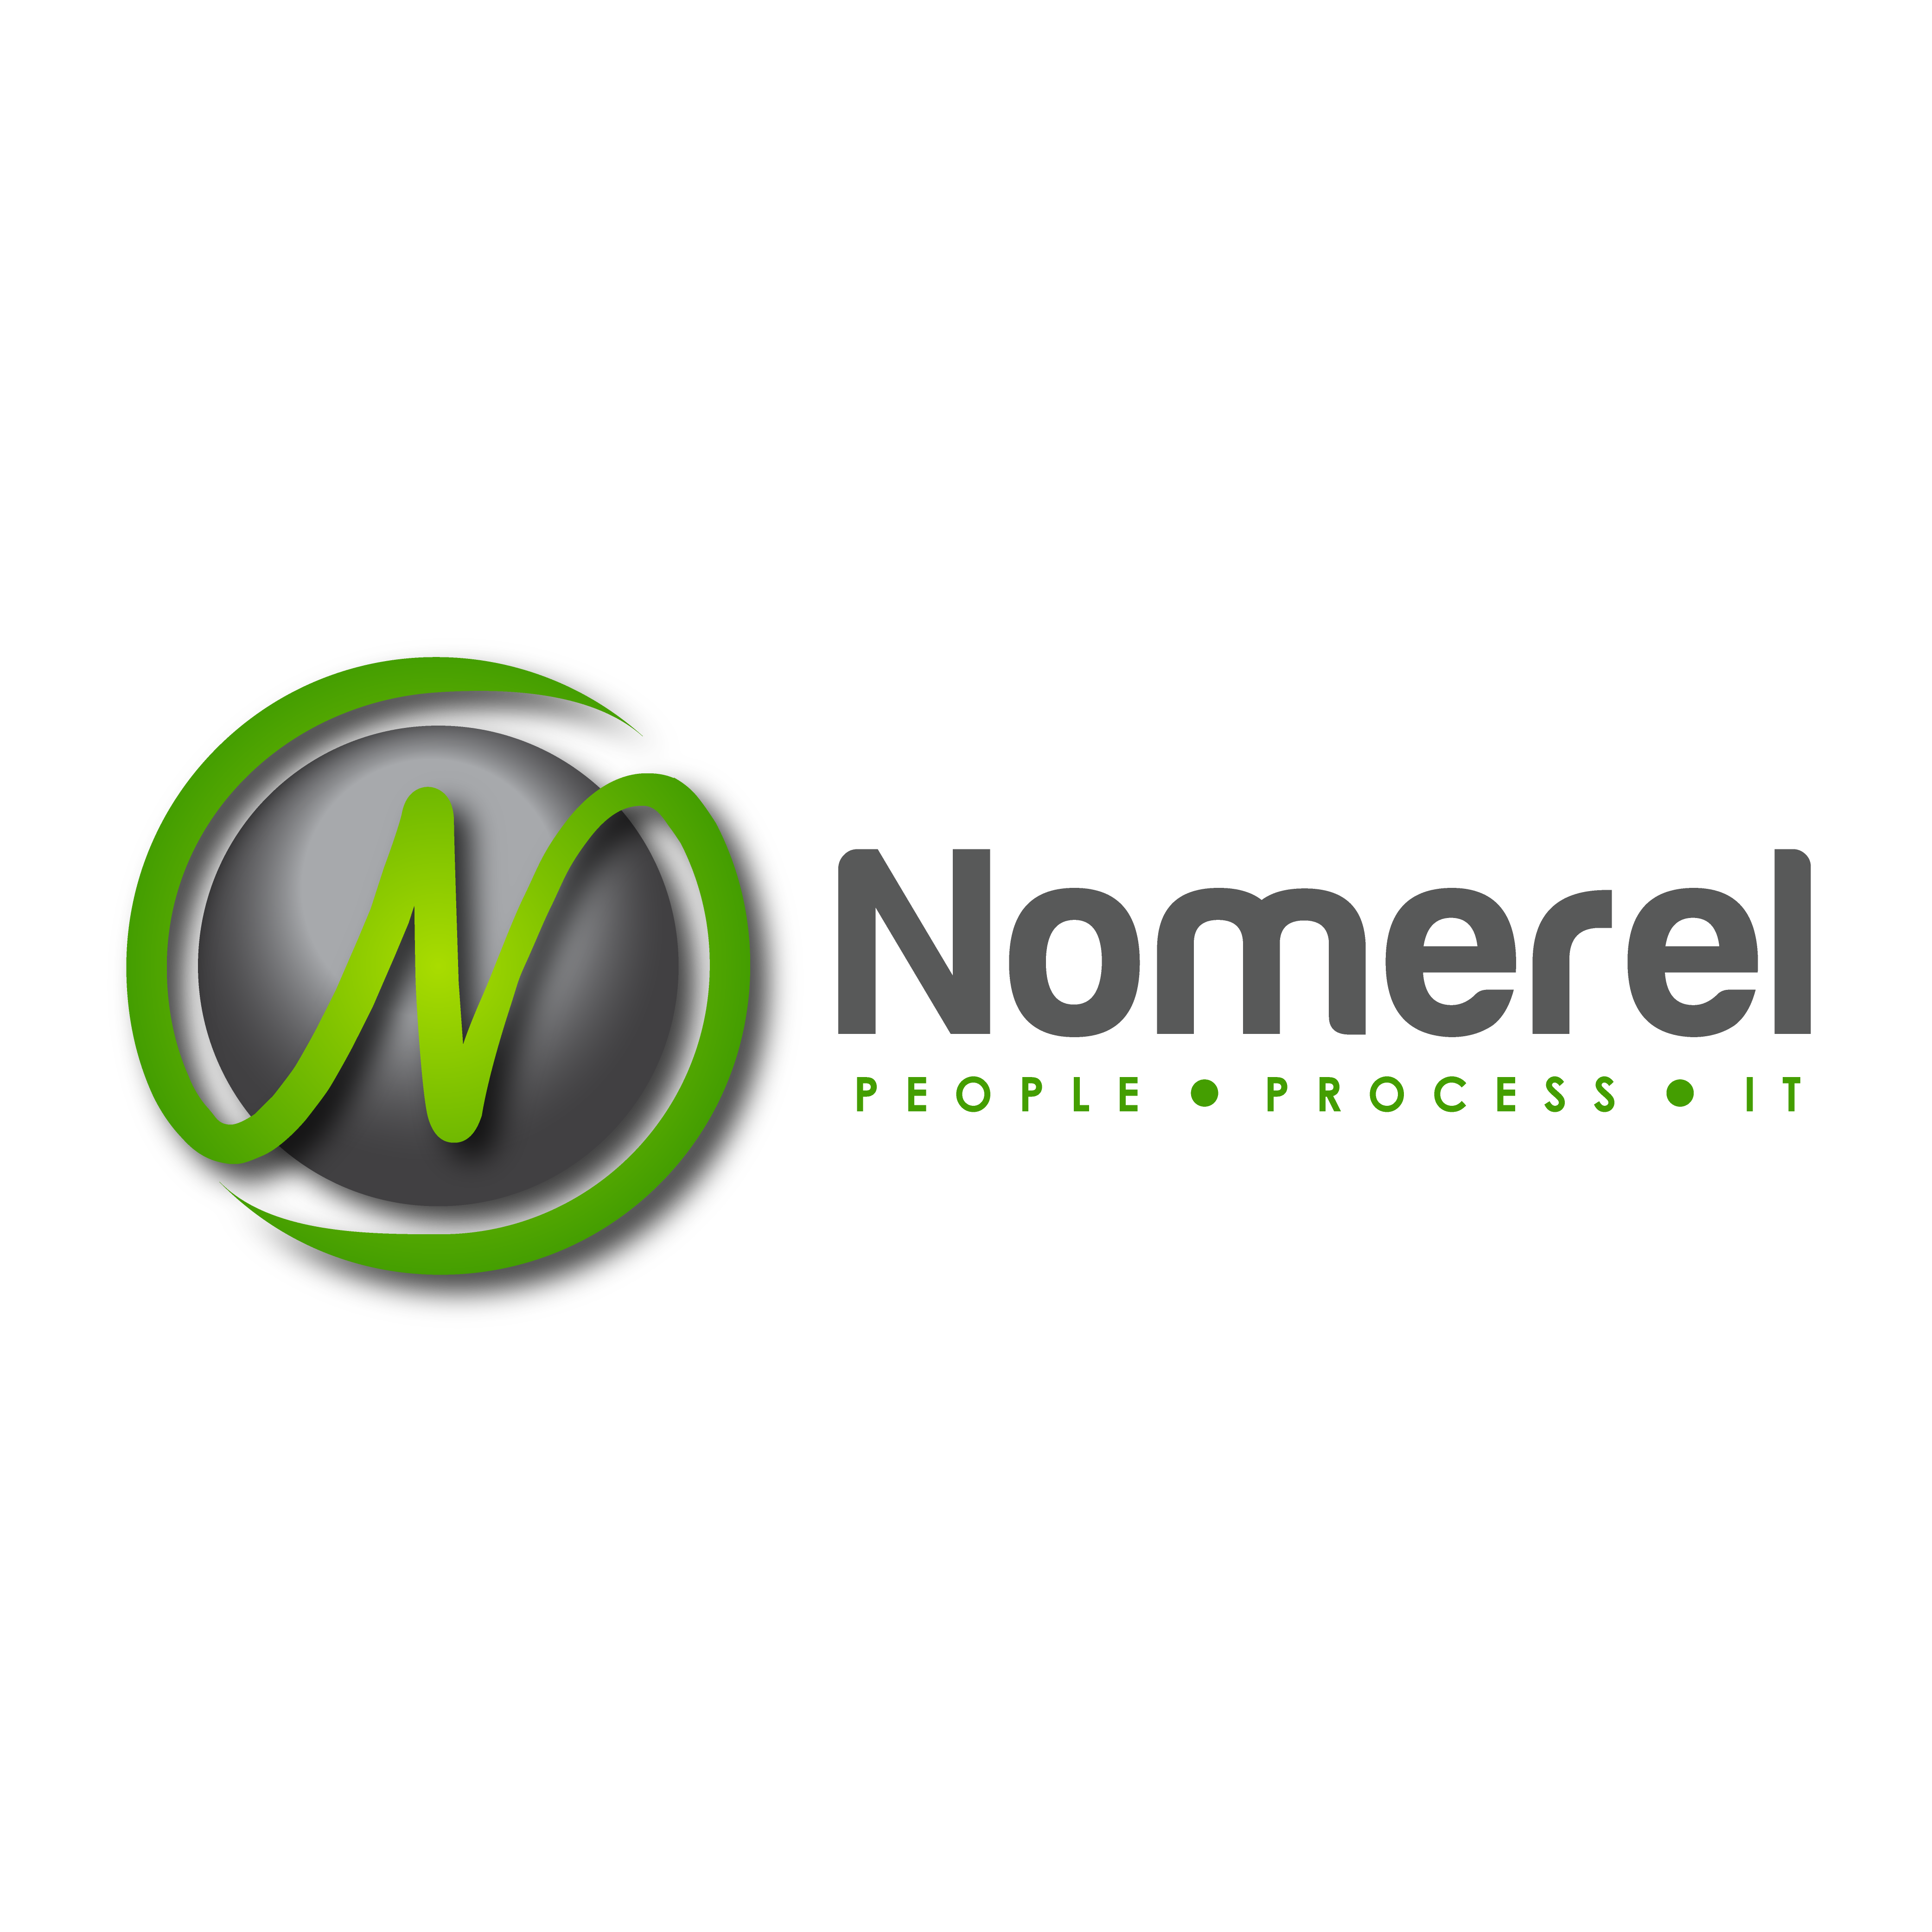 Tulsa IT Services Company Nomerel Launches New Website